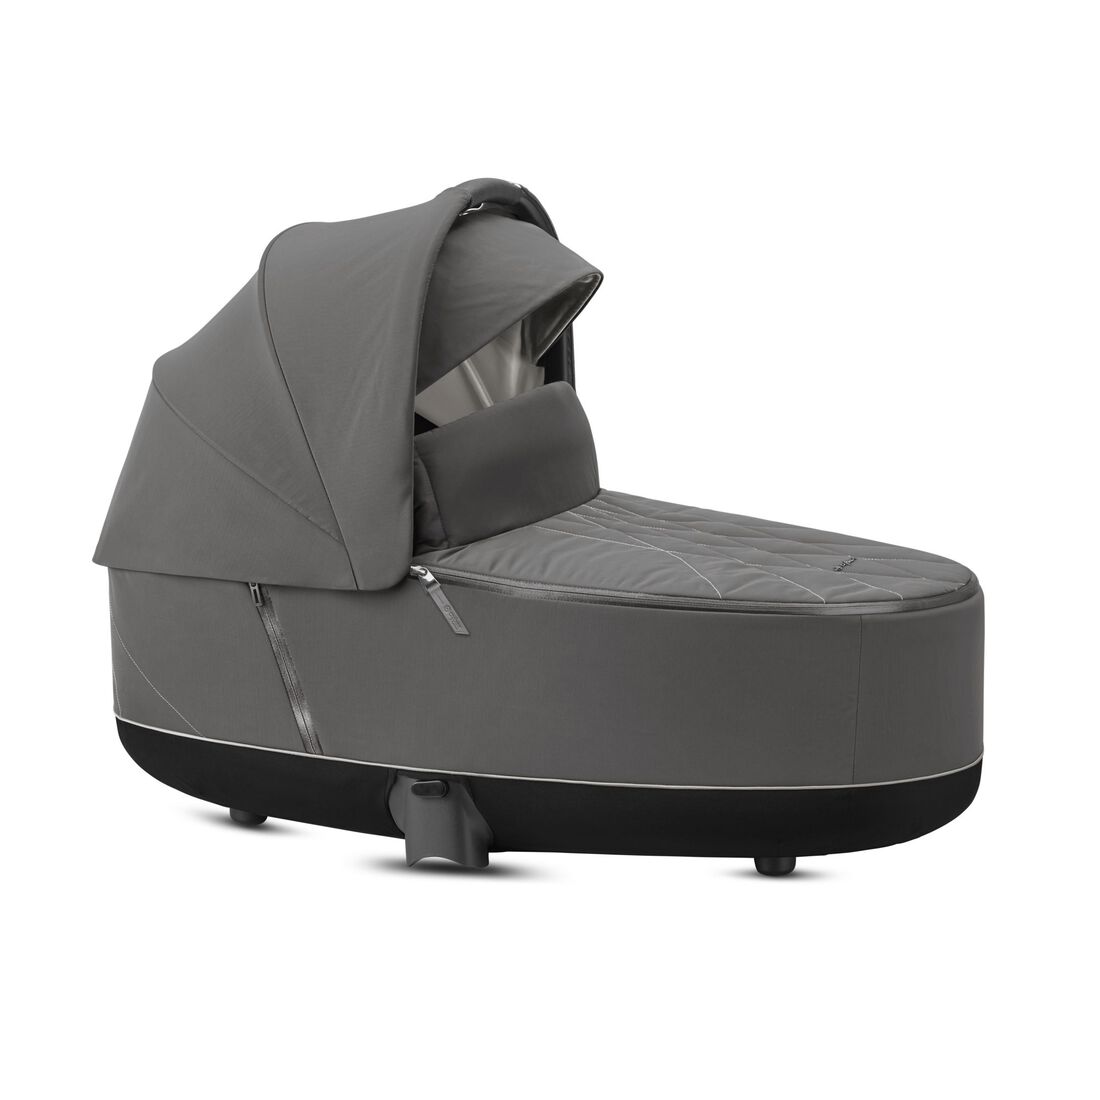 CYBEX Priam 3 Lux Carry Cot - Soho Grey in Soho Grey large image number 2